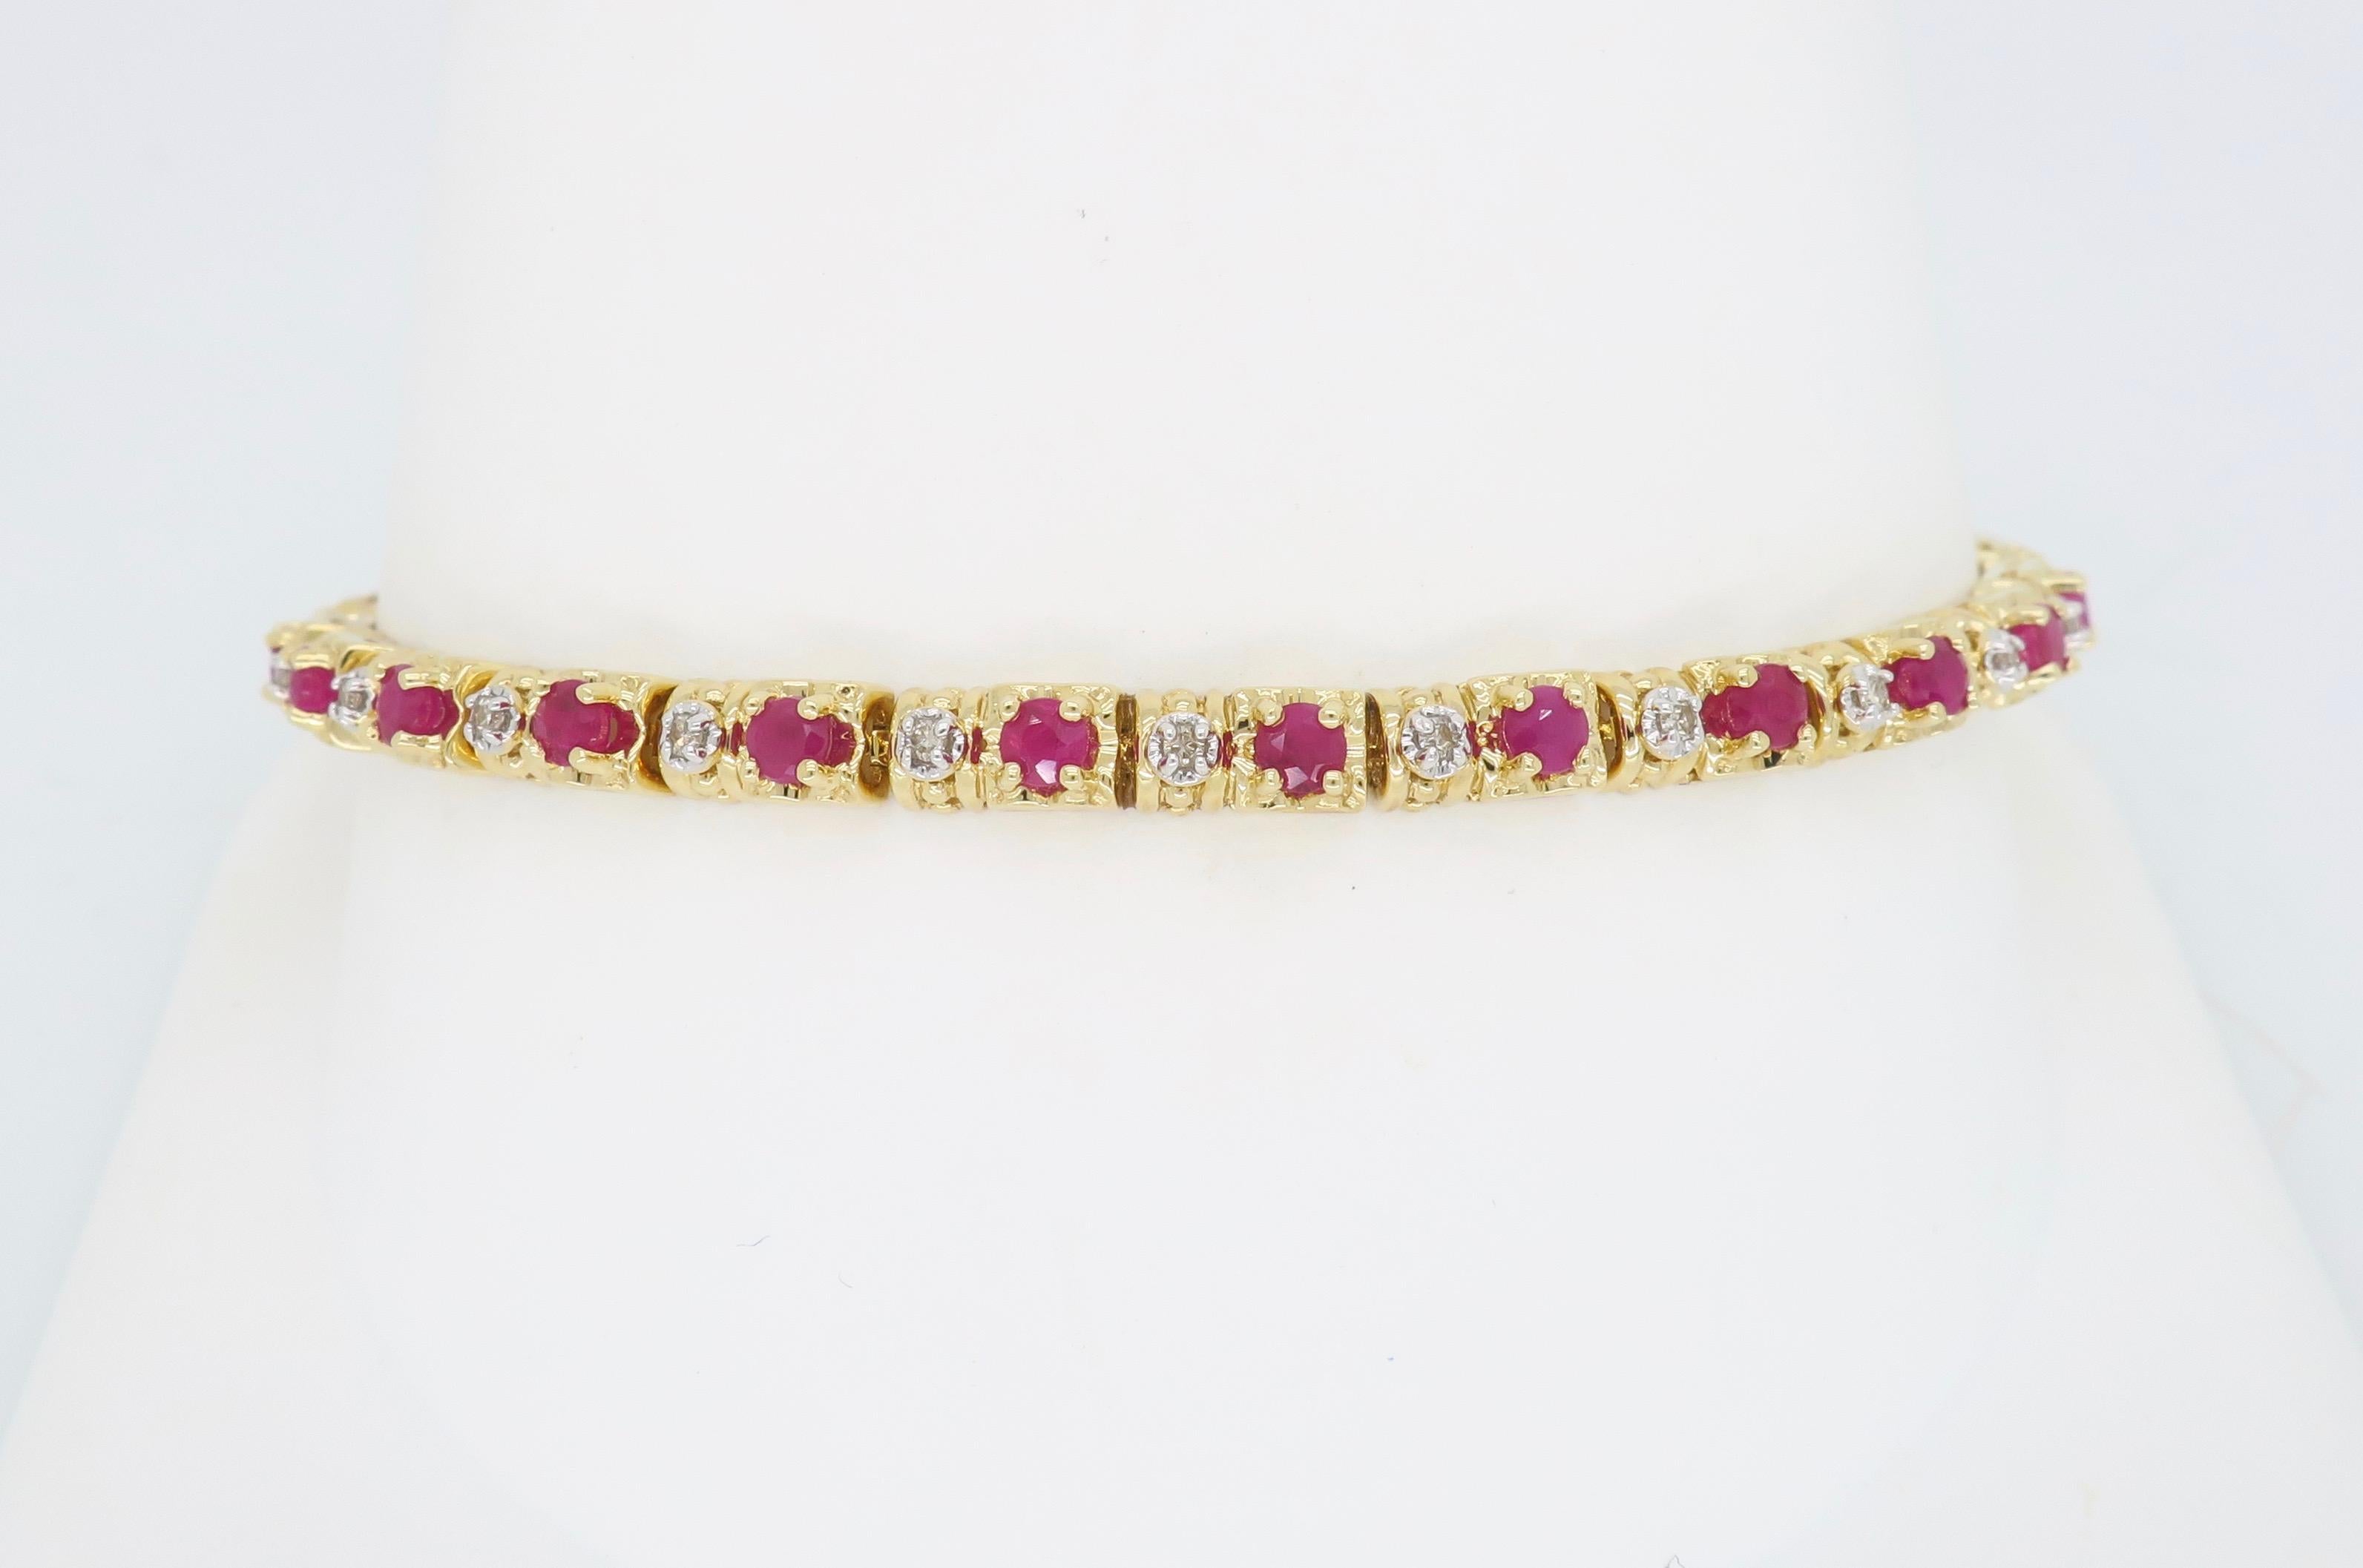 Ruby and diamond tennis bracelet crafted in 14k yellow gold. 

Gemstone: Diamond and Ruby
Gemstone Weight: Approximately 1.68CTW
Diamond Carat Weight: Approximately .15CTW
Diamond Cut: Single Cut Diamonds
Color: Average H-J
Clarity: Average